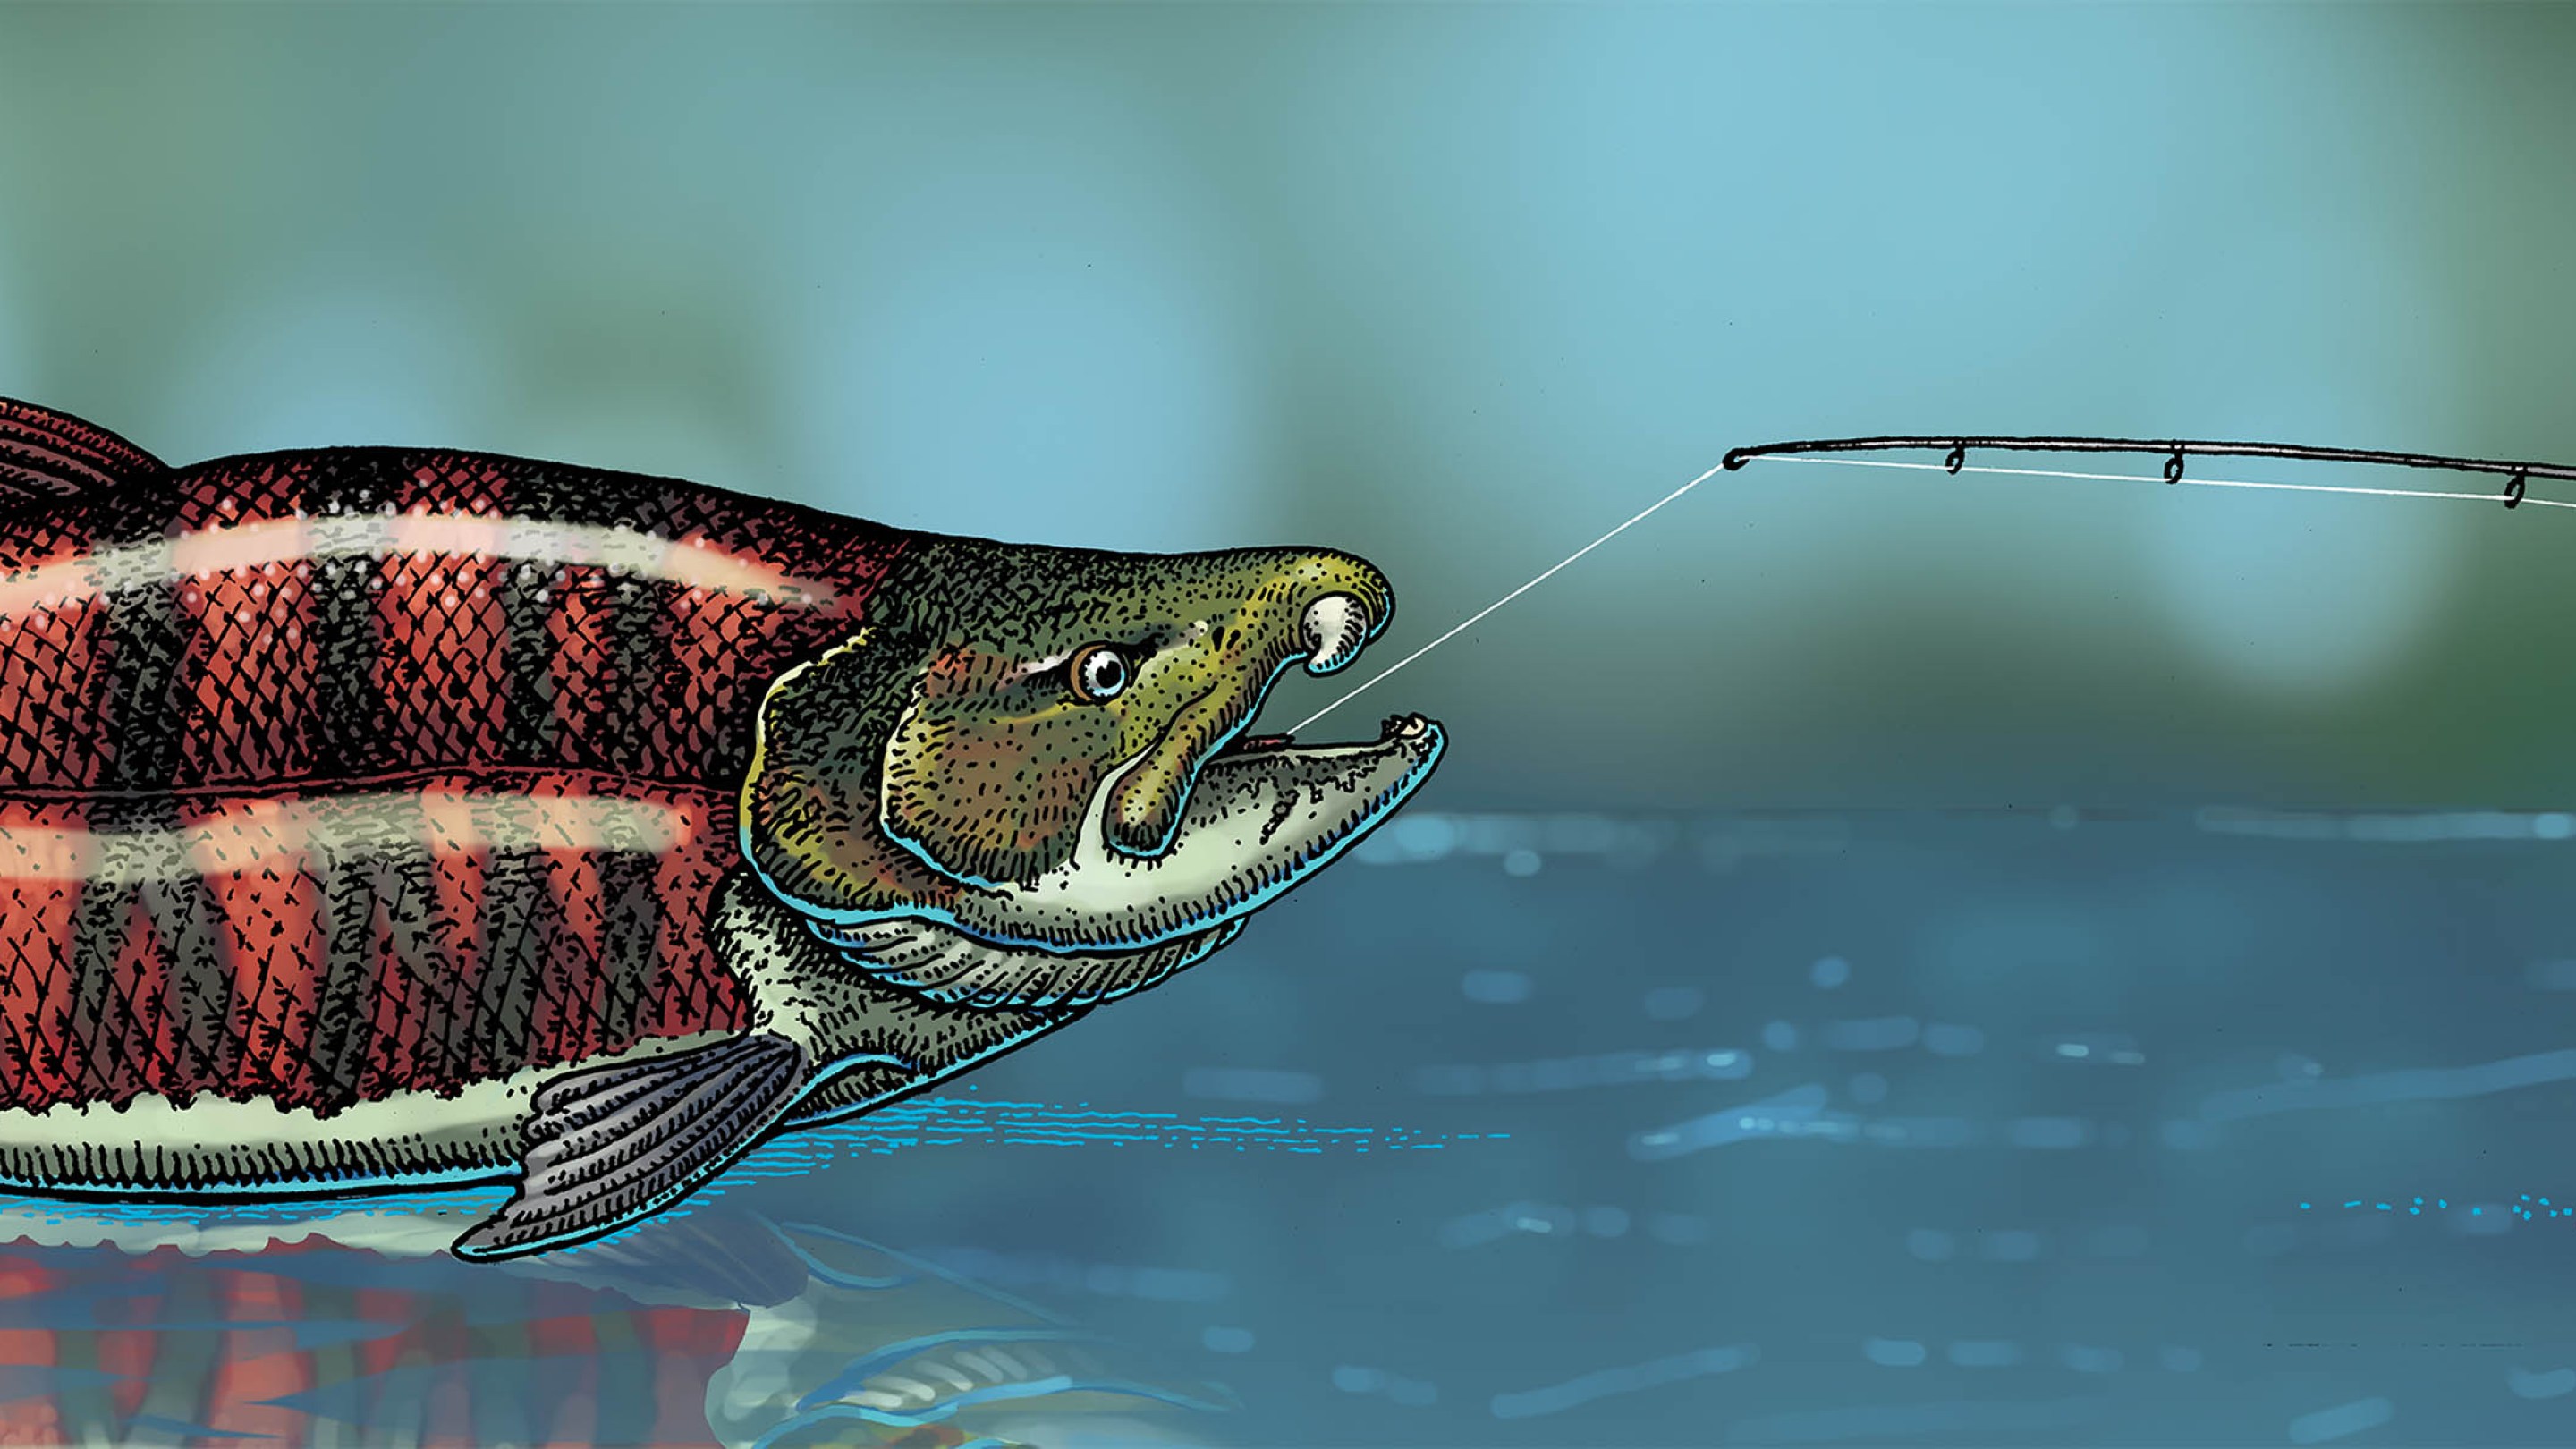 an illustration by Ray Troll depicting a gigantic spike-toothed salmon overpowering a fisherman